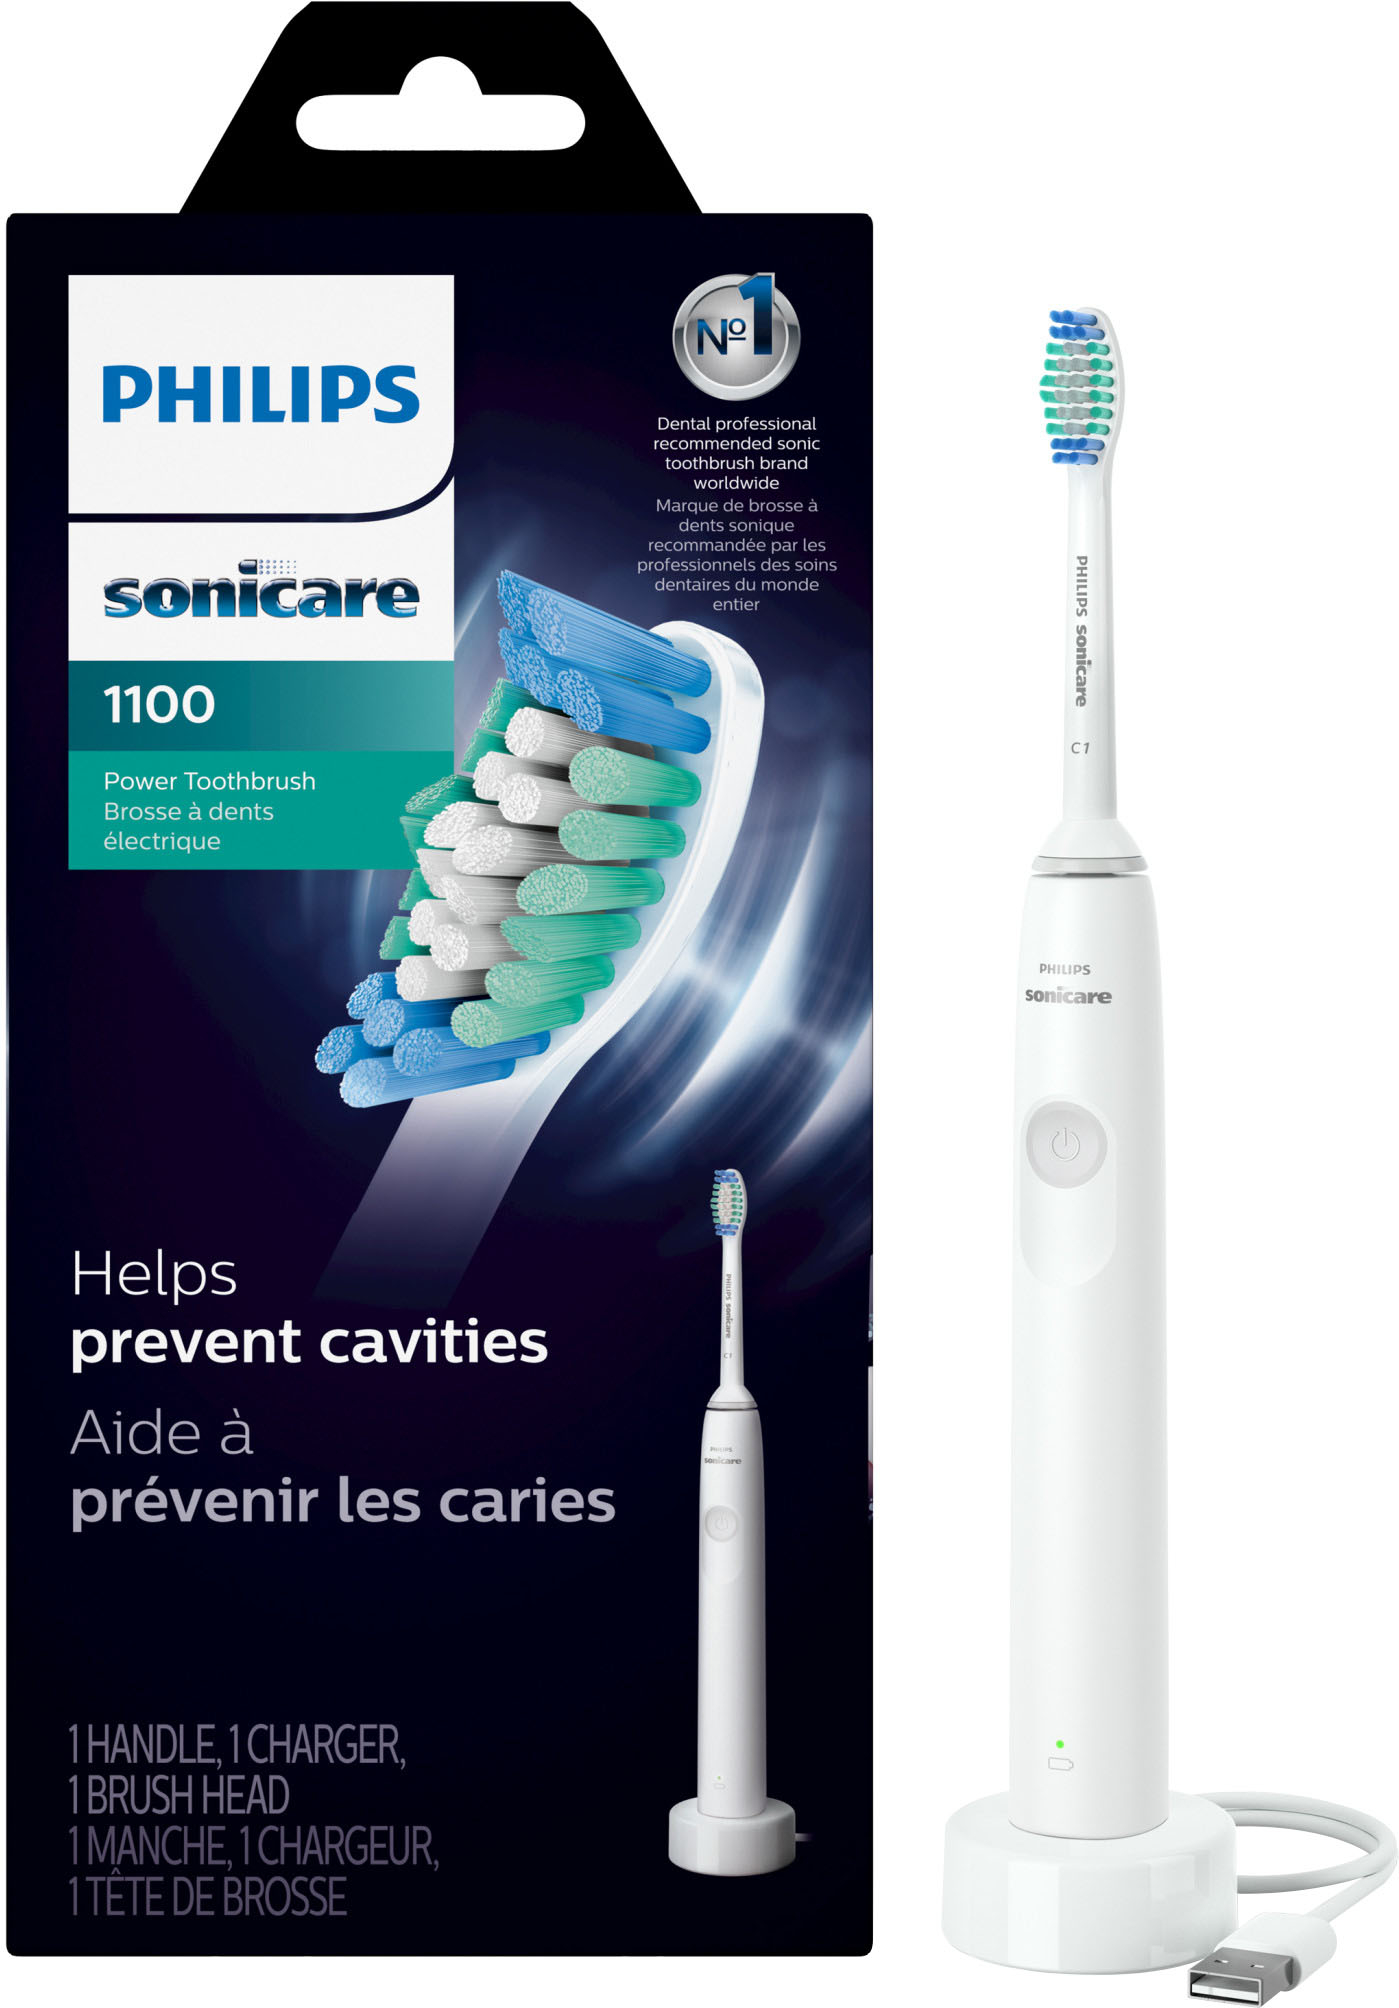 Philips Sonicare 1100 Power Toothbrush, Rechargeable Electric ...